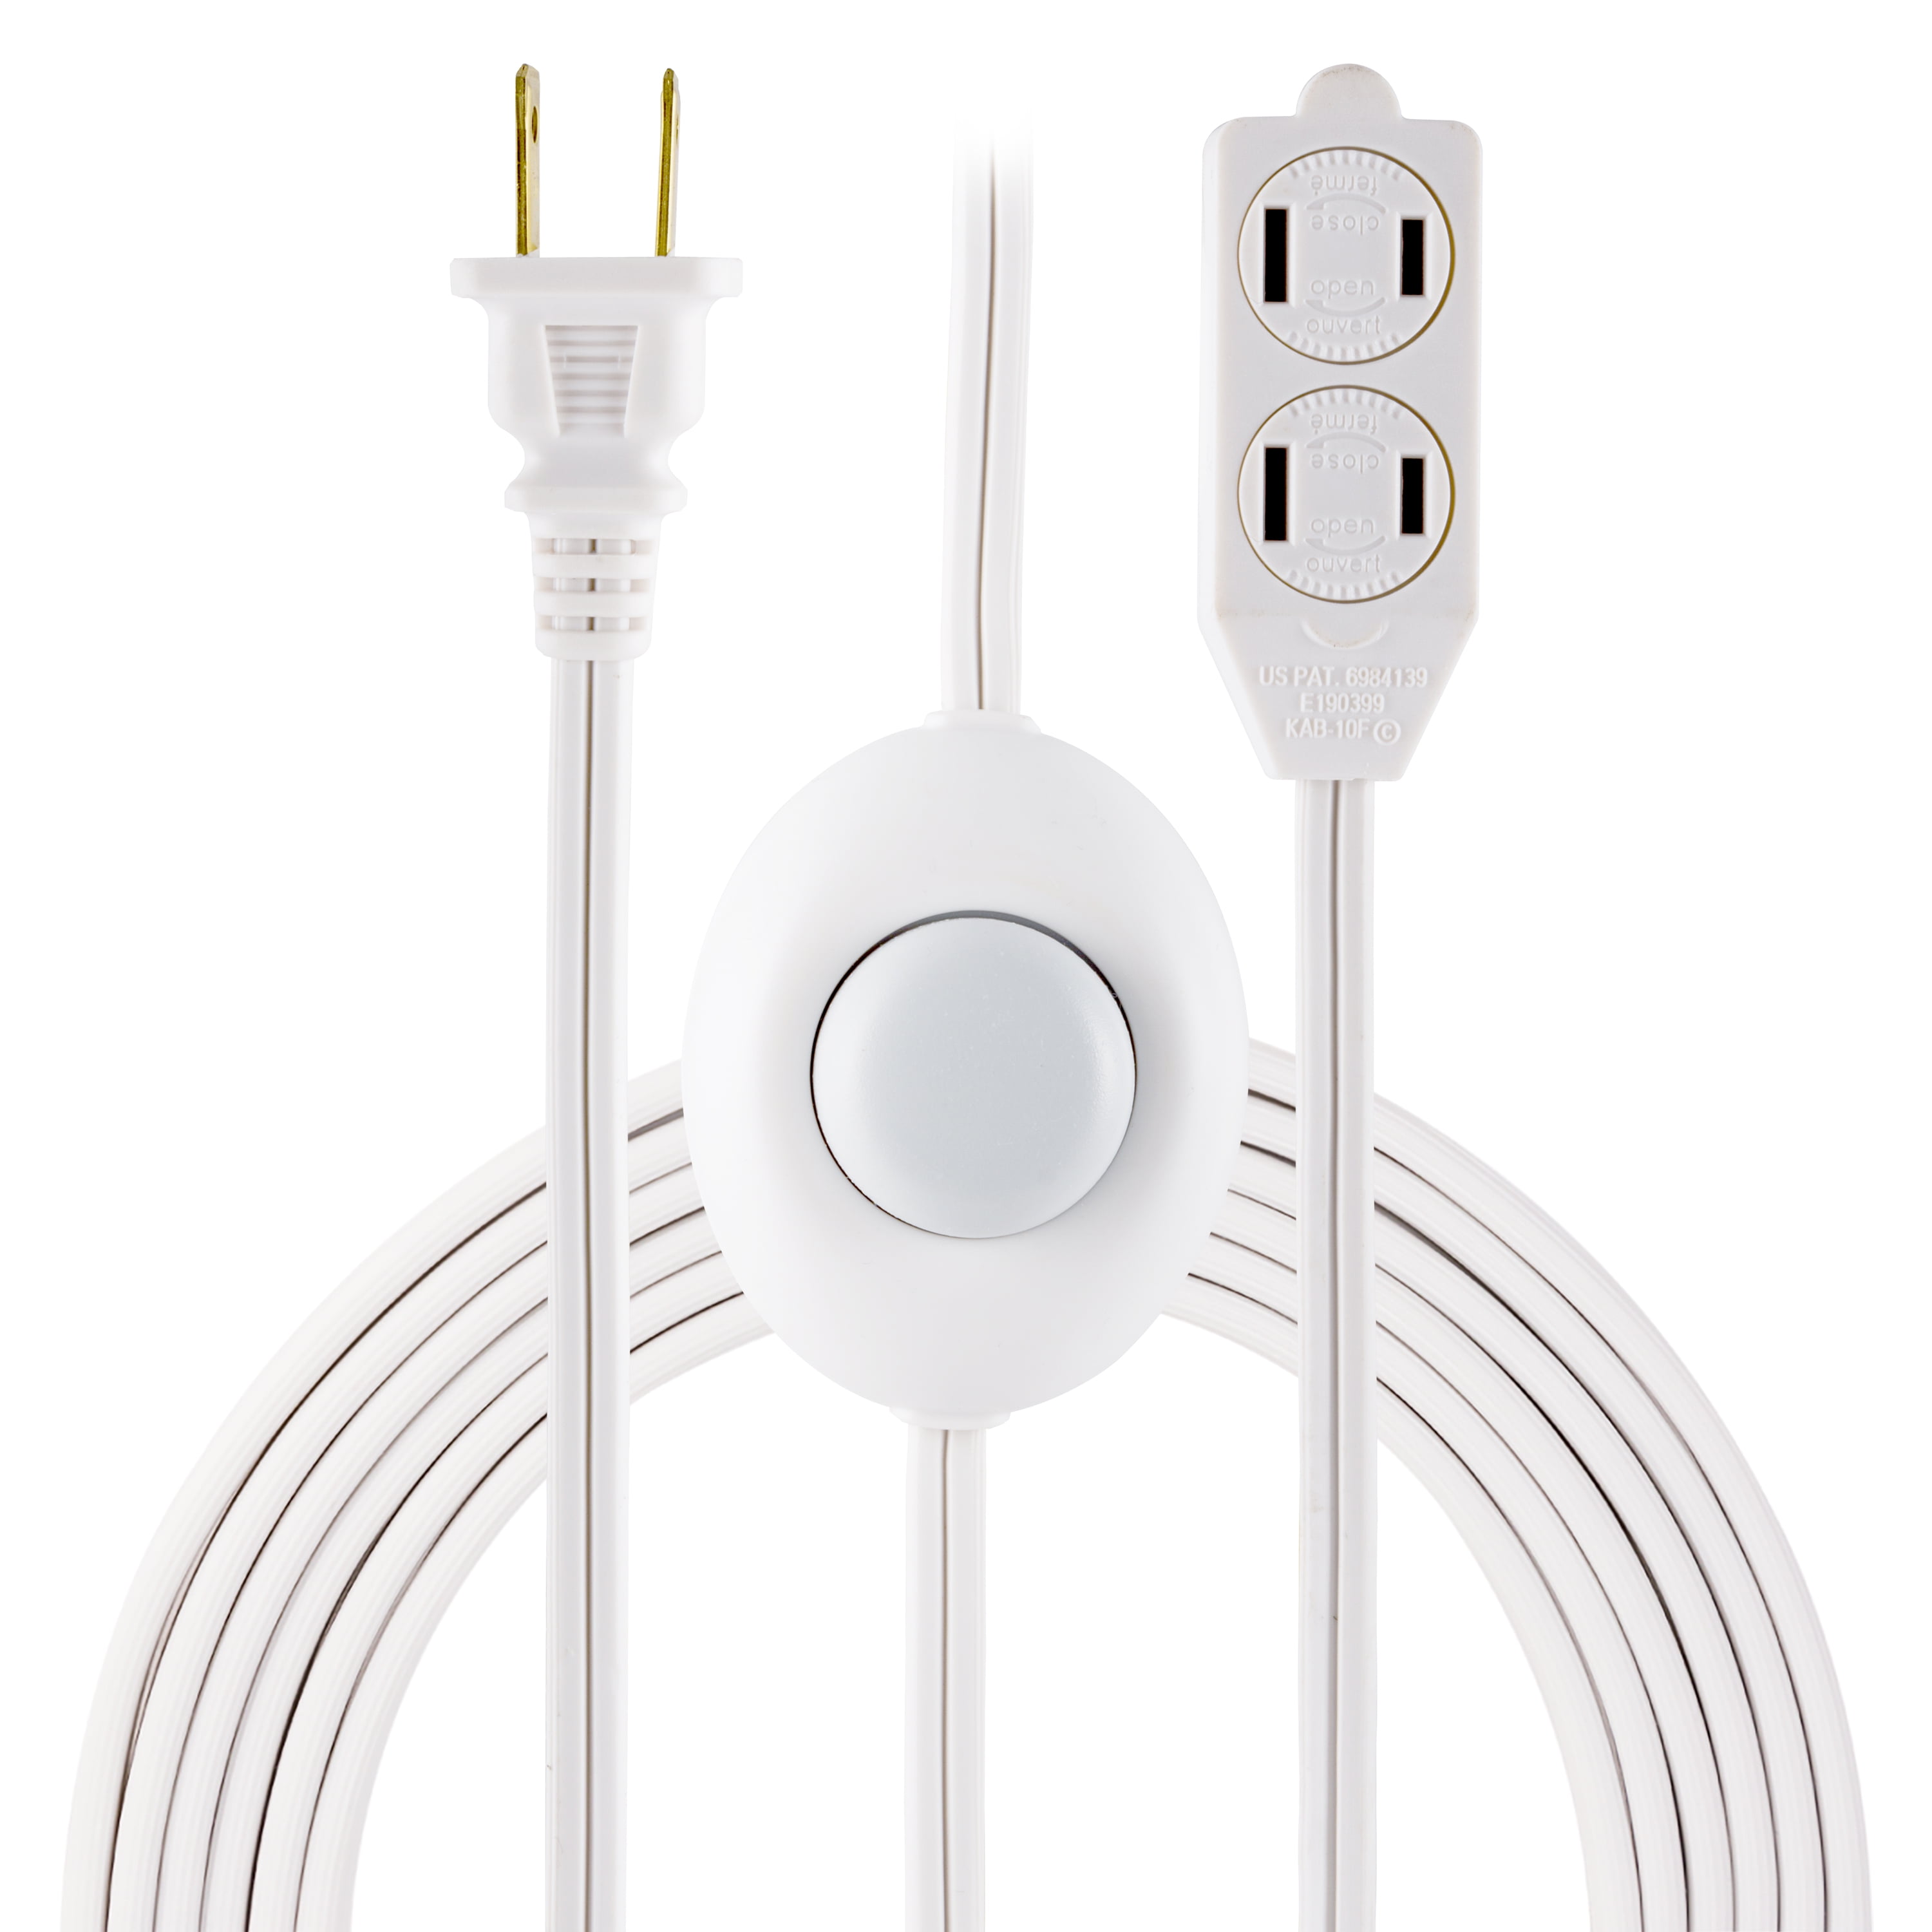 Lot 10 Premium 1ft Extension Cord w/ Two Outlets ETL Listed Power Electric Cable 